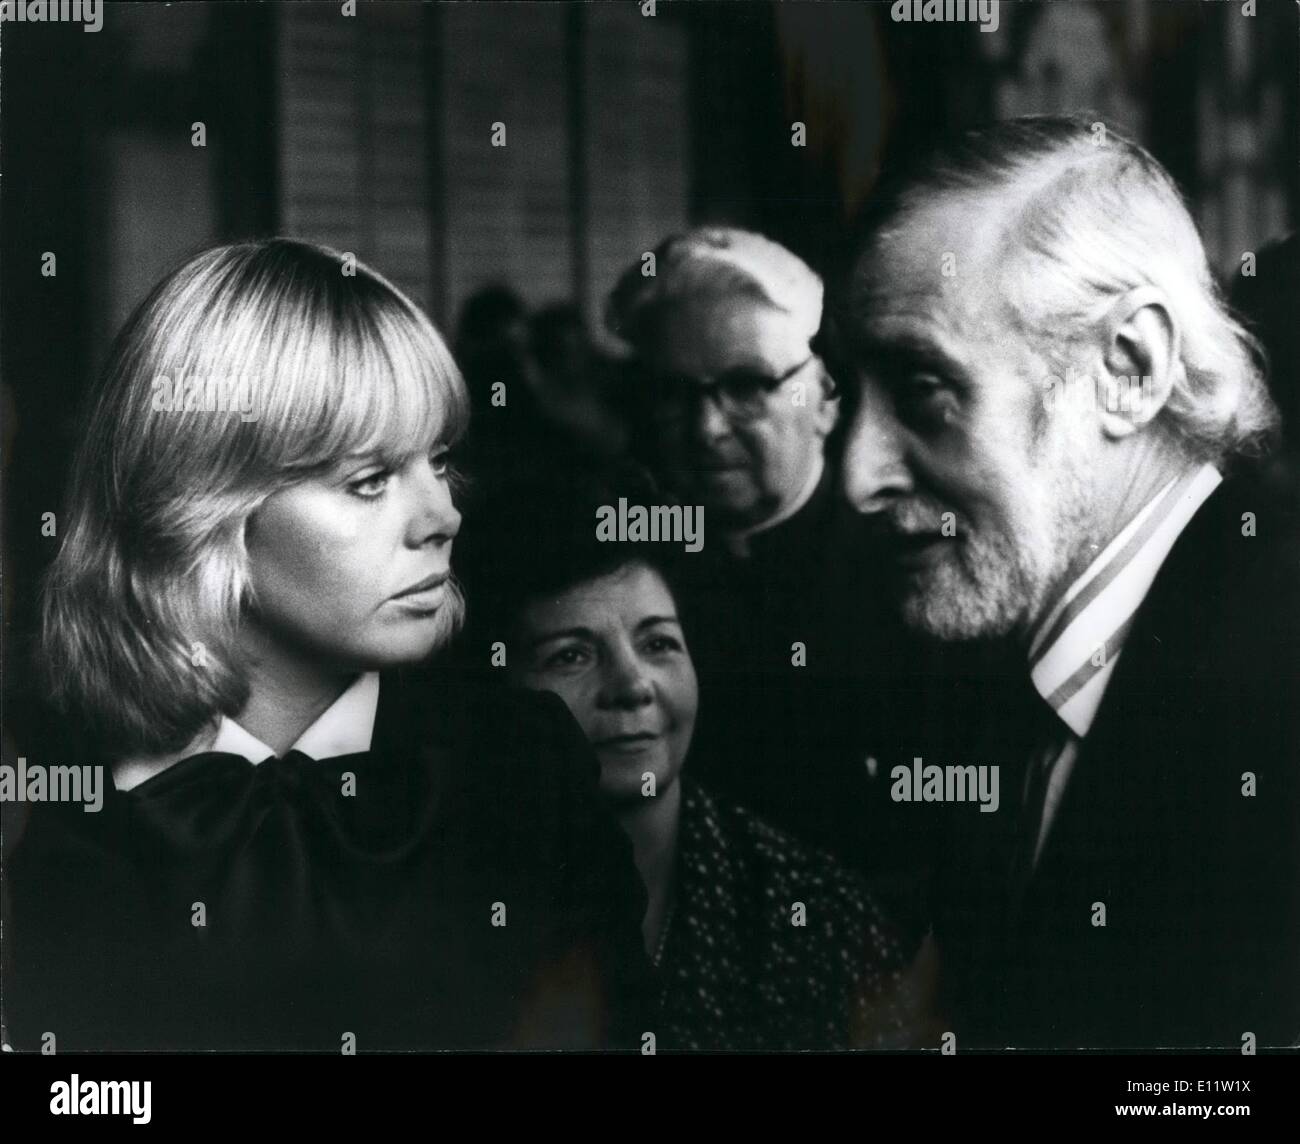 Jul. 27, 1980 - PETER SELLERS FUNERAL: Peter Sellers, 54, who died on Thursday aftercaheart attack, was cremated at Golders Green, North London, Yesterday, Hundreds of his fans, stars and celebrities attended the service. Photo shows Former wife, Britt Ekland seen leaving after the service with Sellers' great friend Spike Milligan. Stock Photo